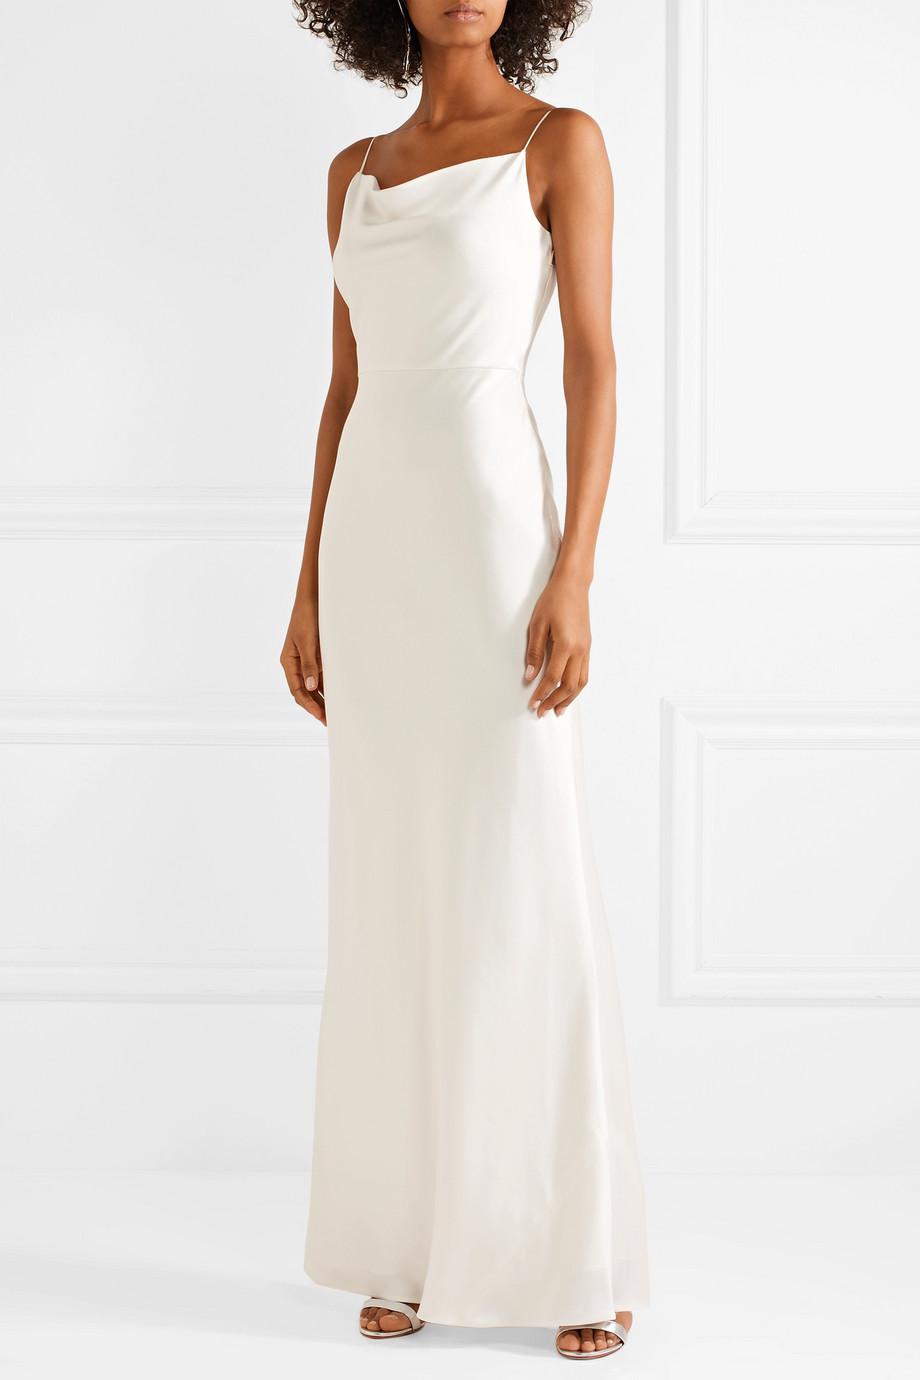 Jason Wu Crepe-trimmed Satin Gown Ivory ...